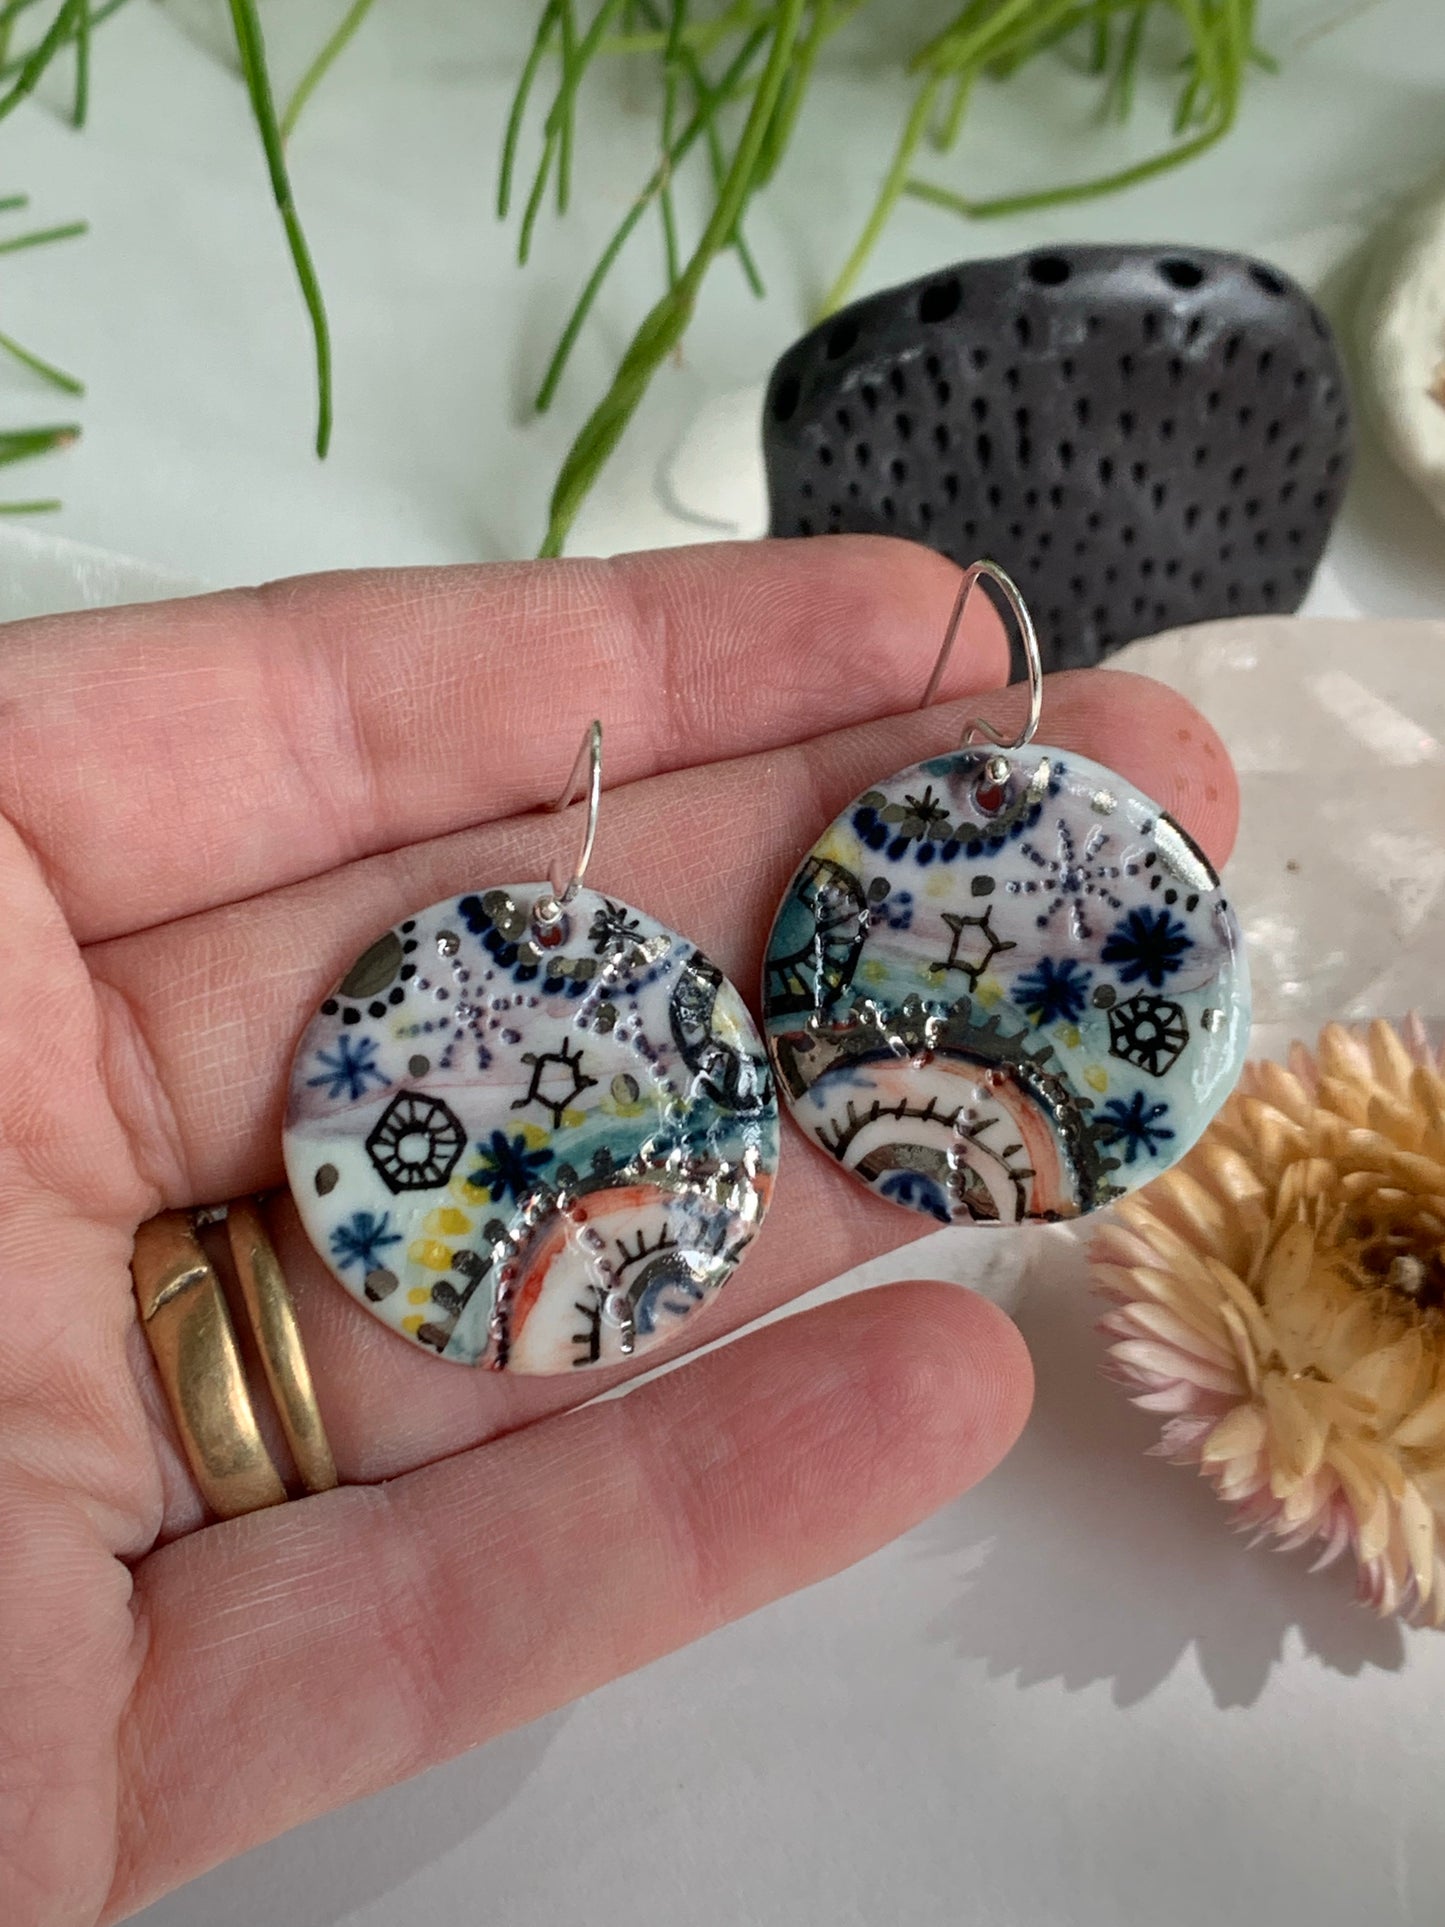 Hand Painted ‘Stars and Cells’ Porcelain Earrings